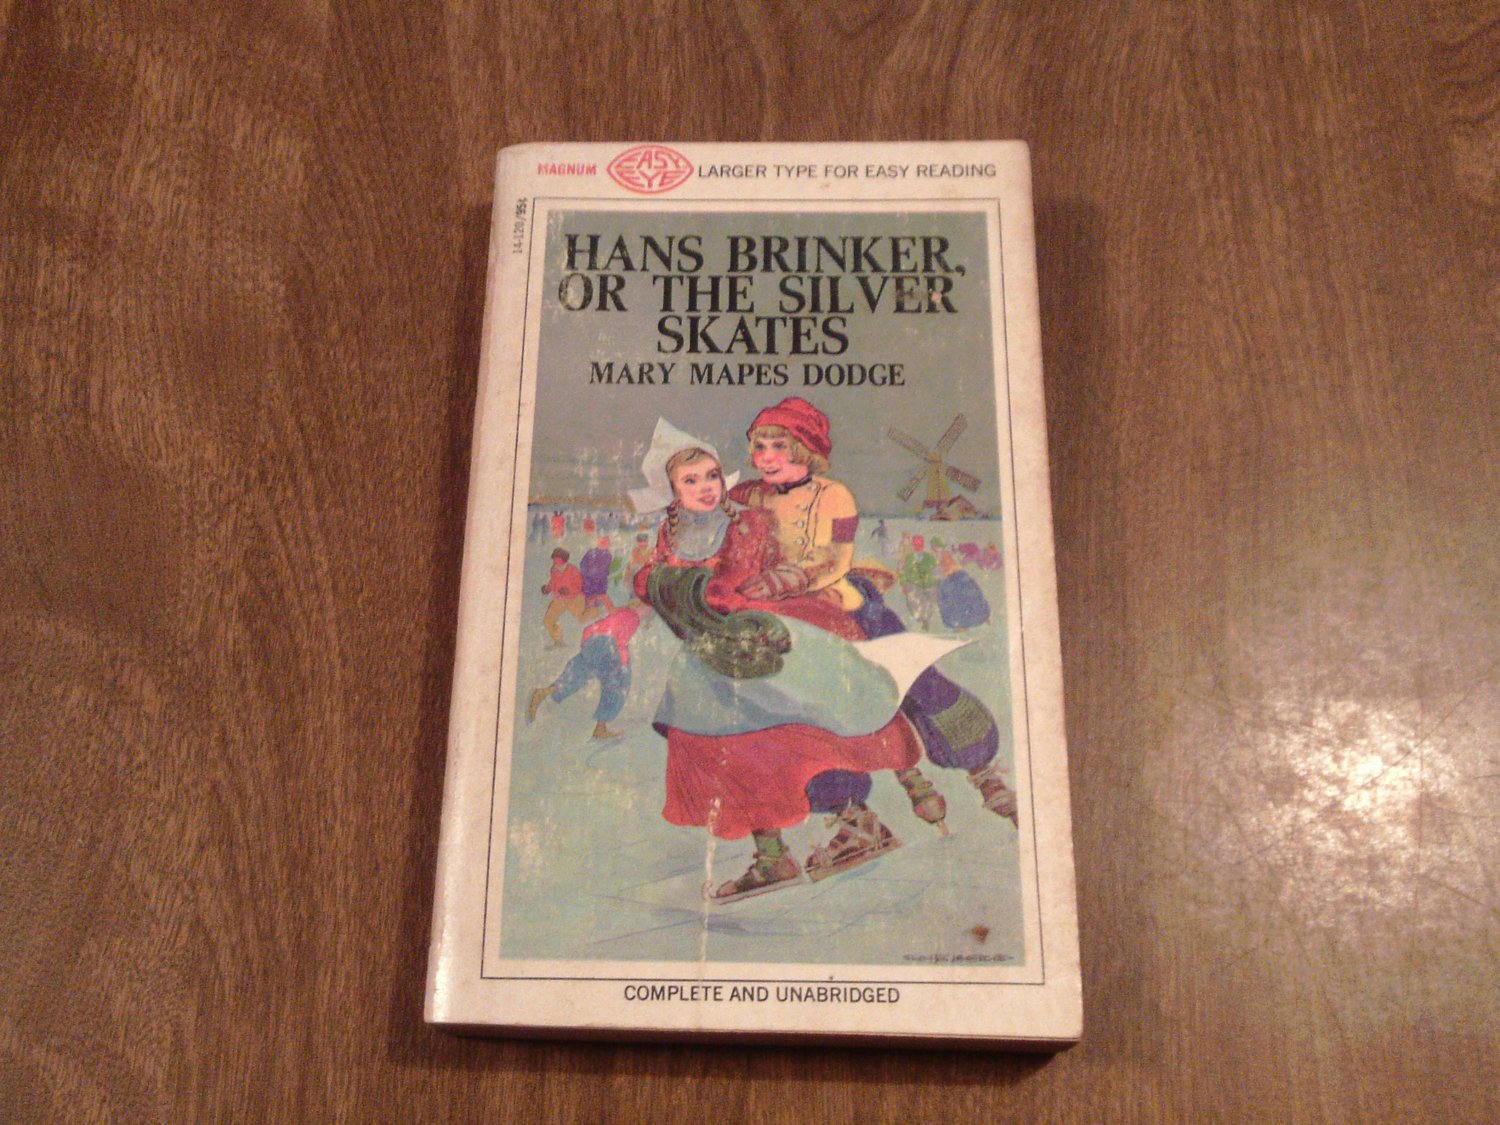 Hans brinker or the silver skates by mary mapes dodge The Silver Skates Alma Books